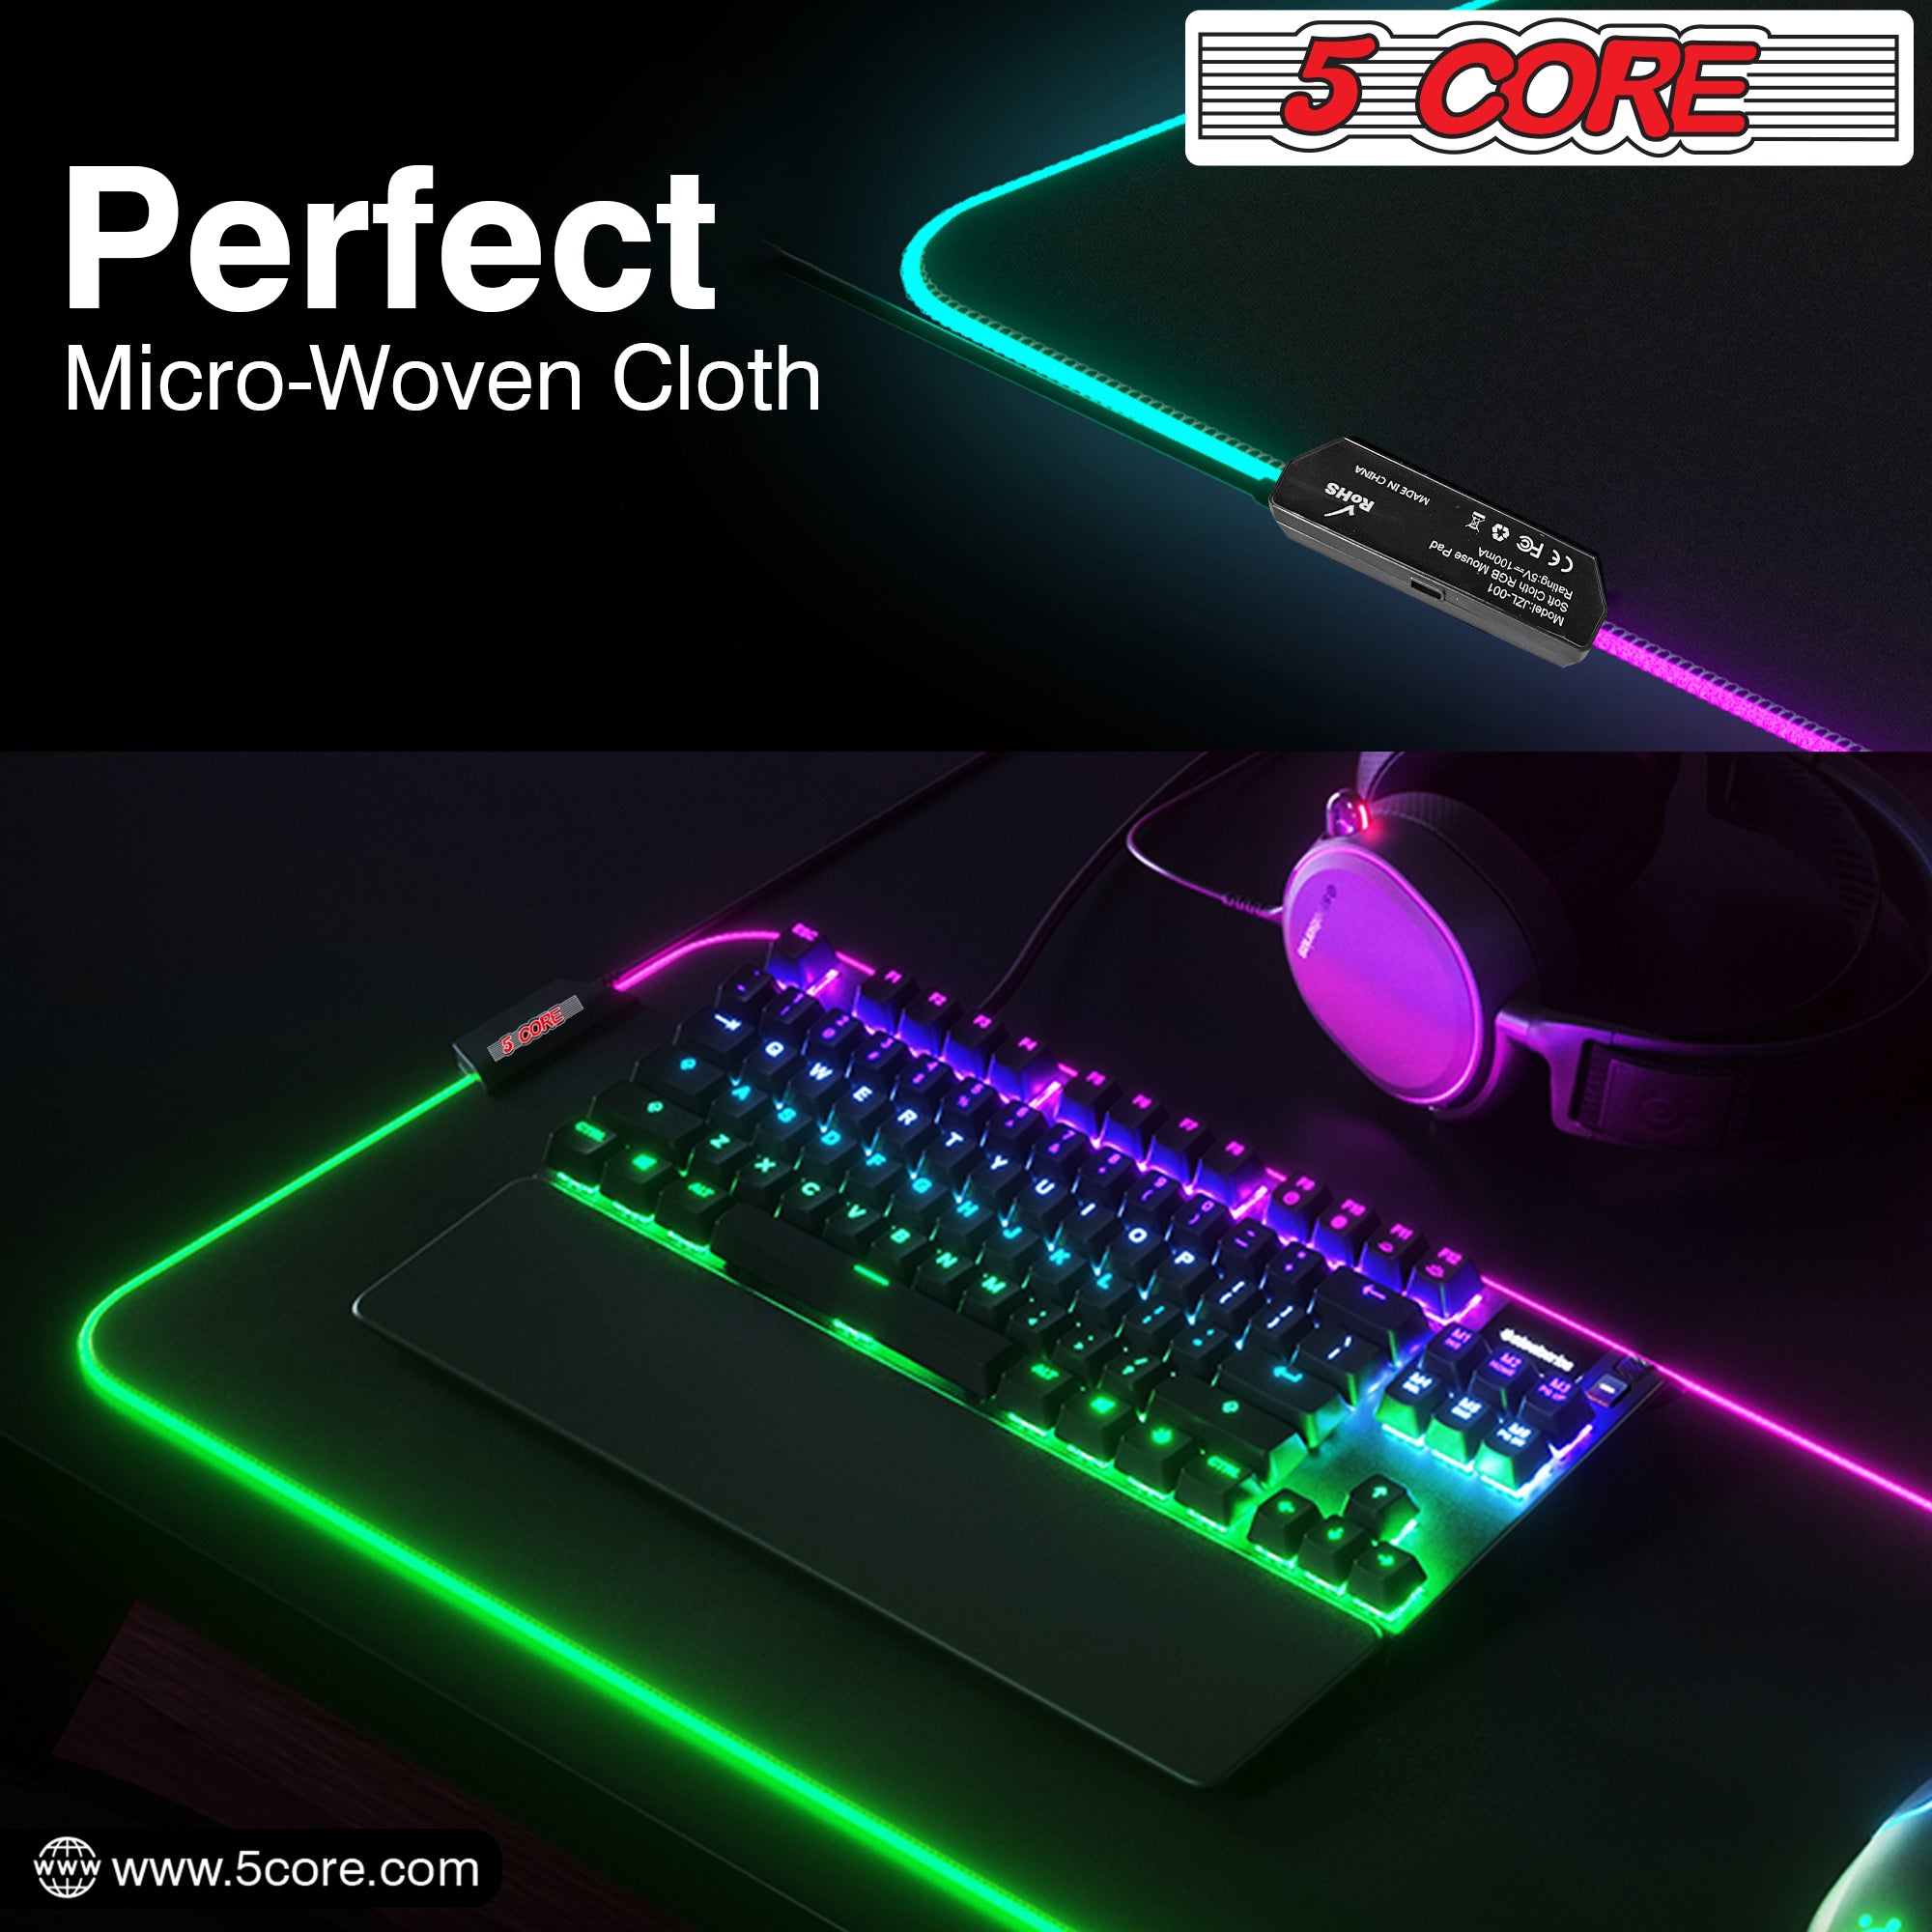 5 Core Gaming Mouse Pad RGB LED LightStandard Size with Durable Stitched Edges and Non-Slip Rubber Base Large Gaming Desk Mouse -MP 300 RGB